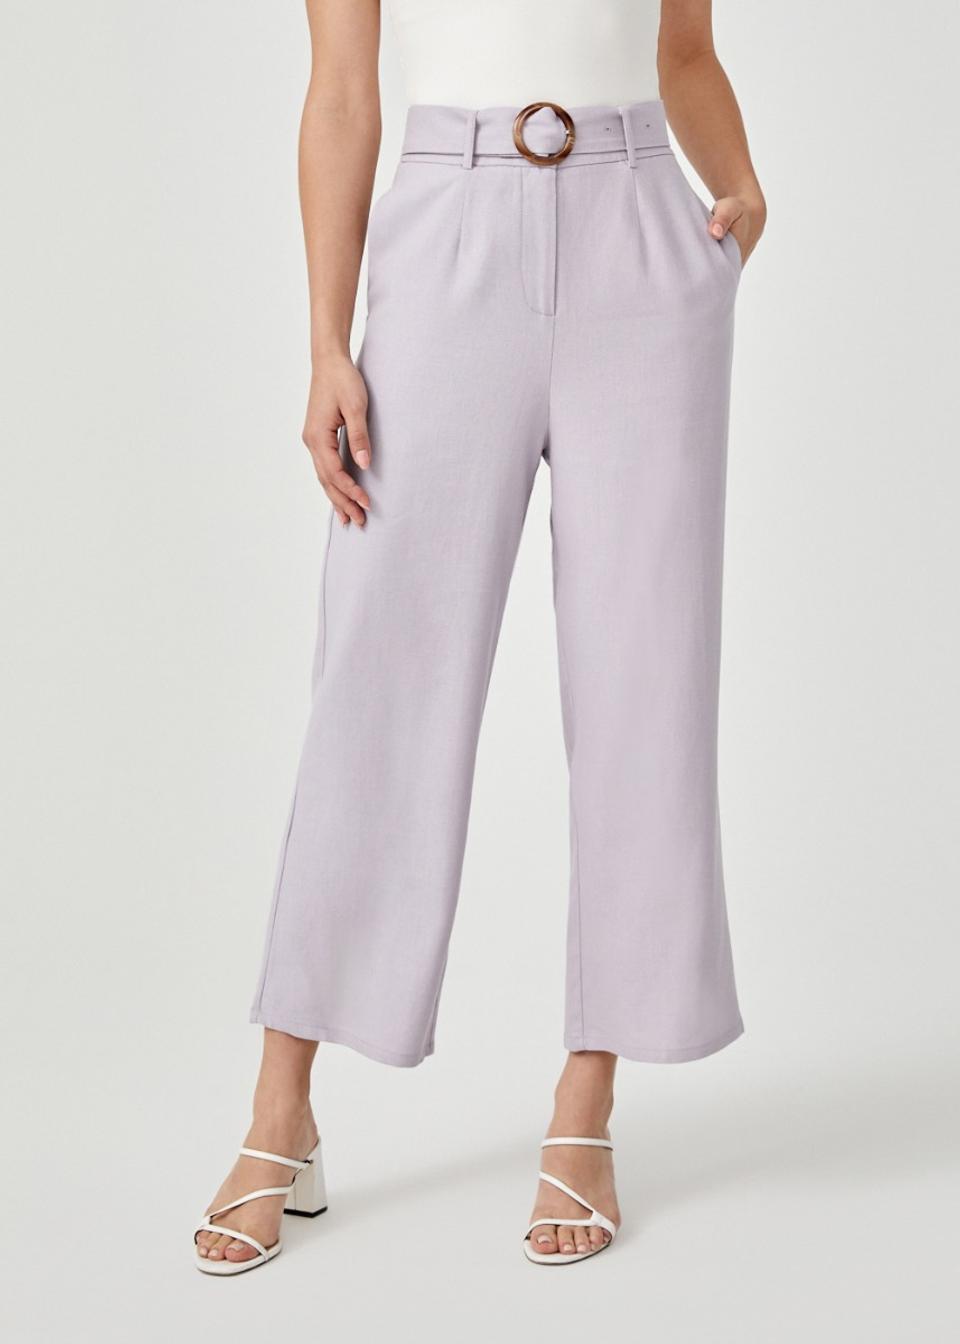 Joselyn Belted Straight Leg Pants